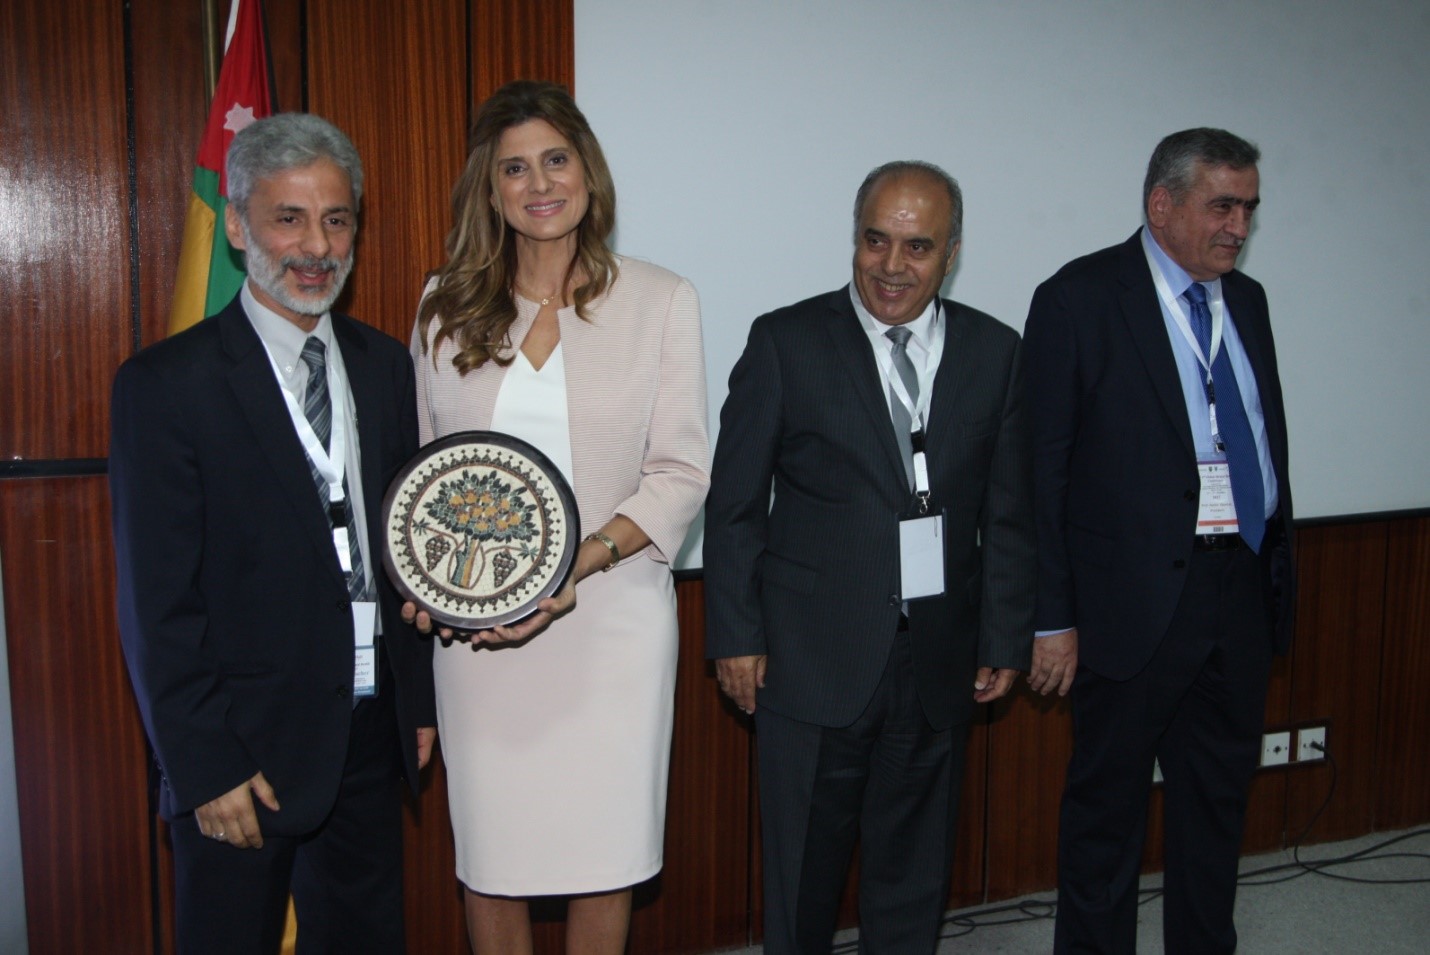 Her Highness Princesses Dina Mired of Jordan, the Conference Patron, awards Dr. Al-Delaimy the Conference plaque for his effort in co-leading the organization of the 2017 2nd National Global Mental Health Conference to the left of her is President of the University of Jordan and the Dean of School of Medicine.